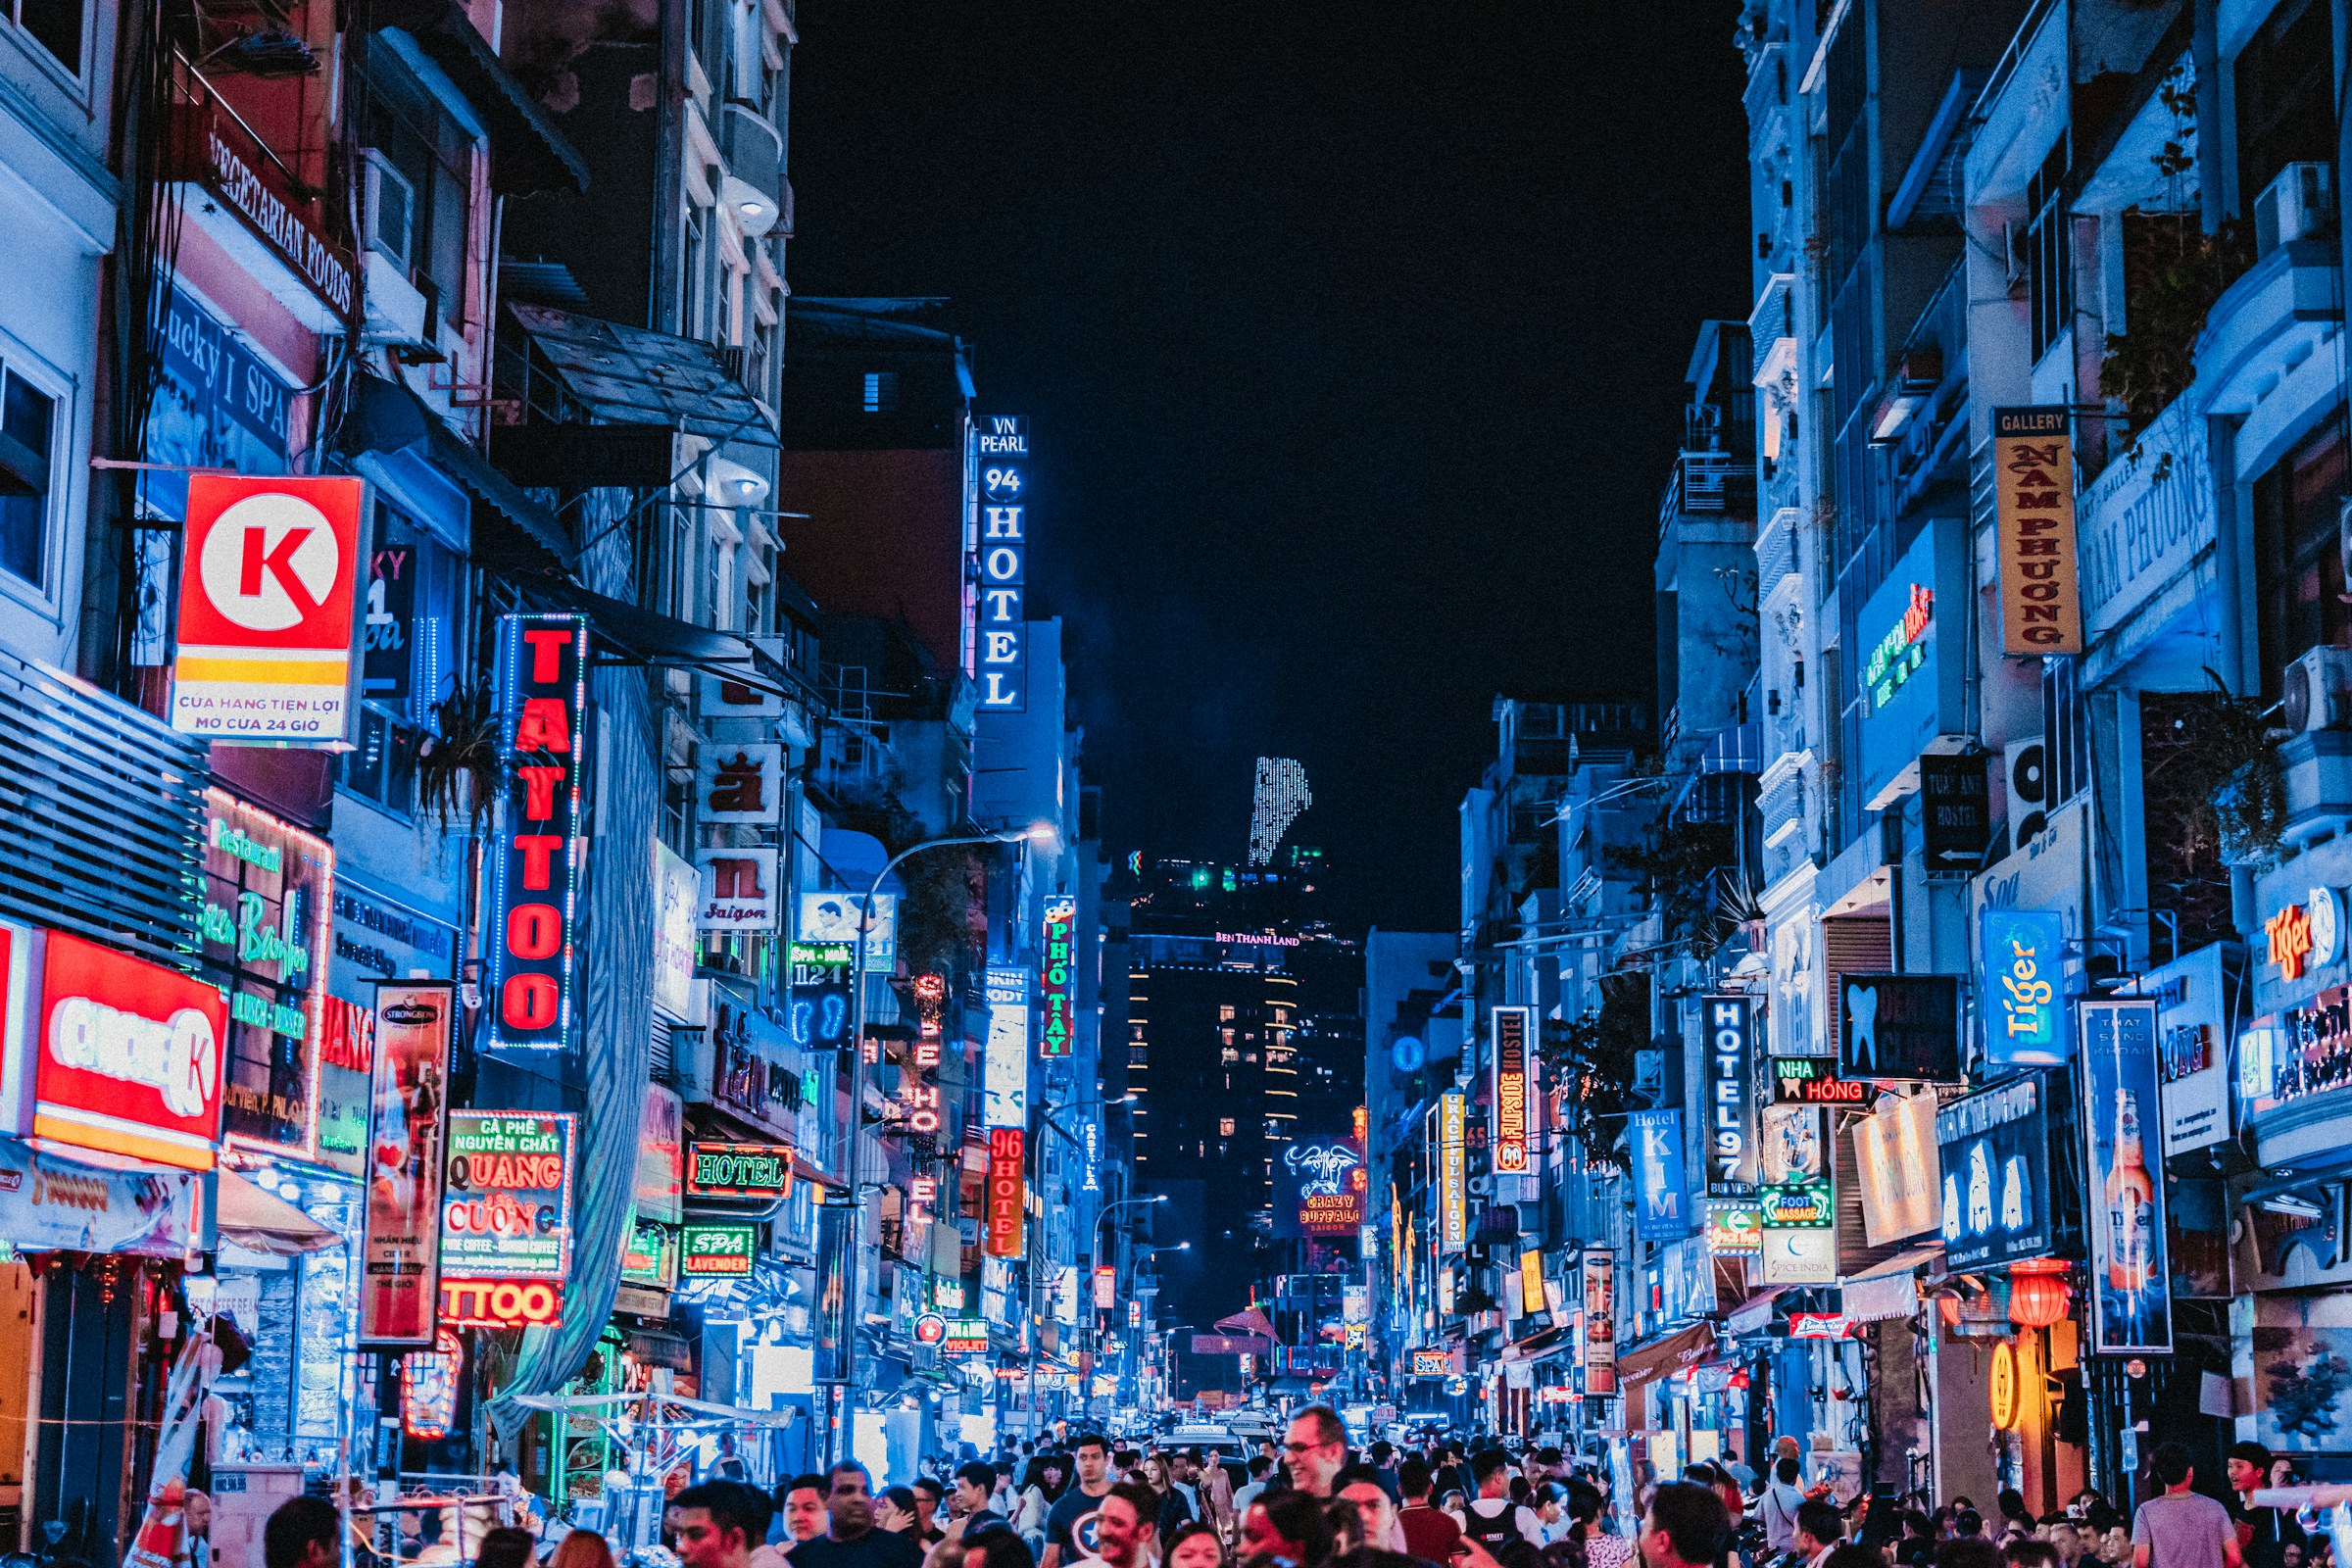 Lively city street in the evening in Ho Chi Minh City with neon lights and signs, crowd strolling in big city atmosphere.